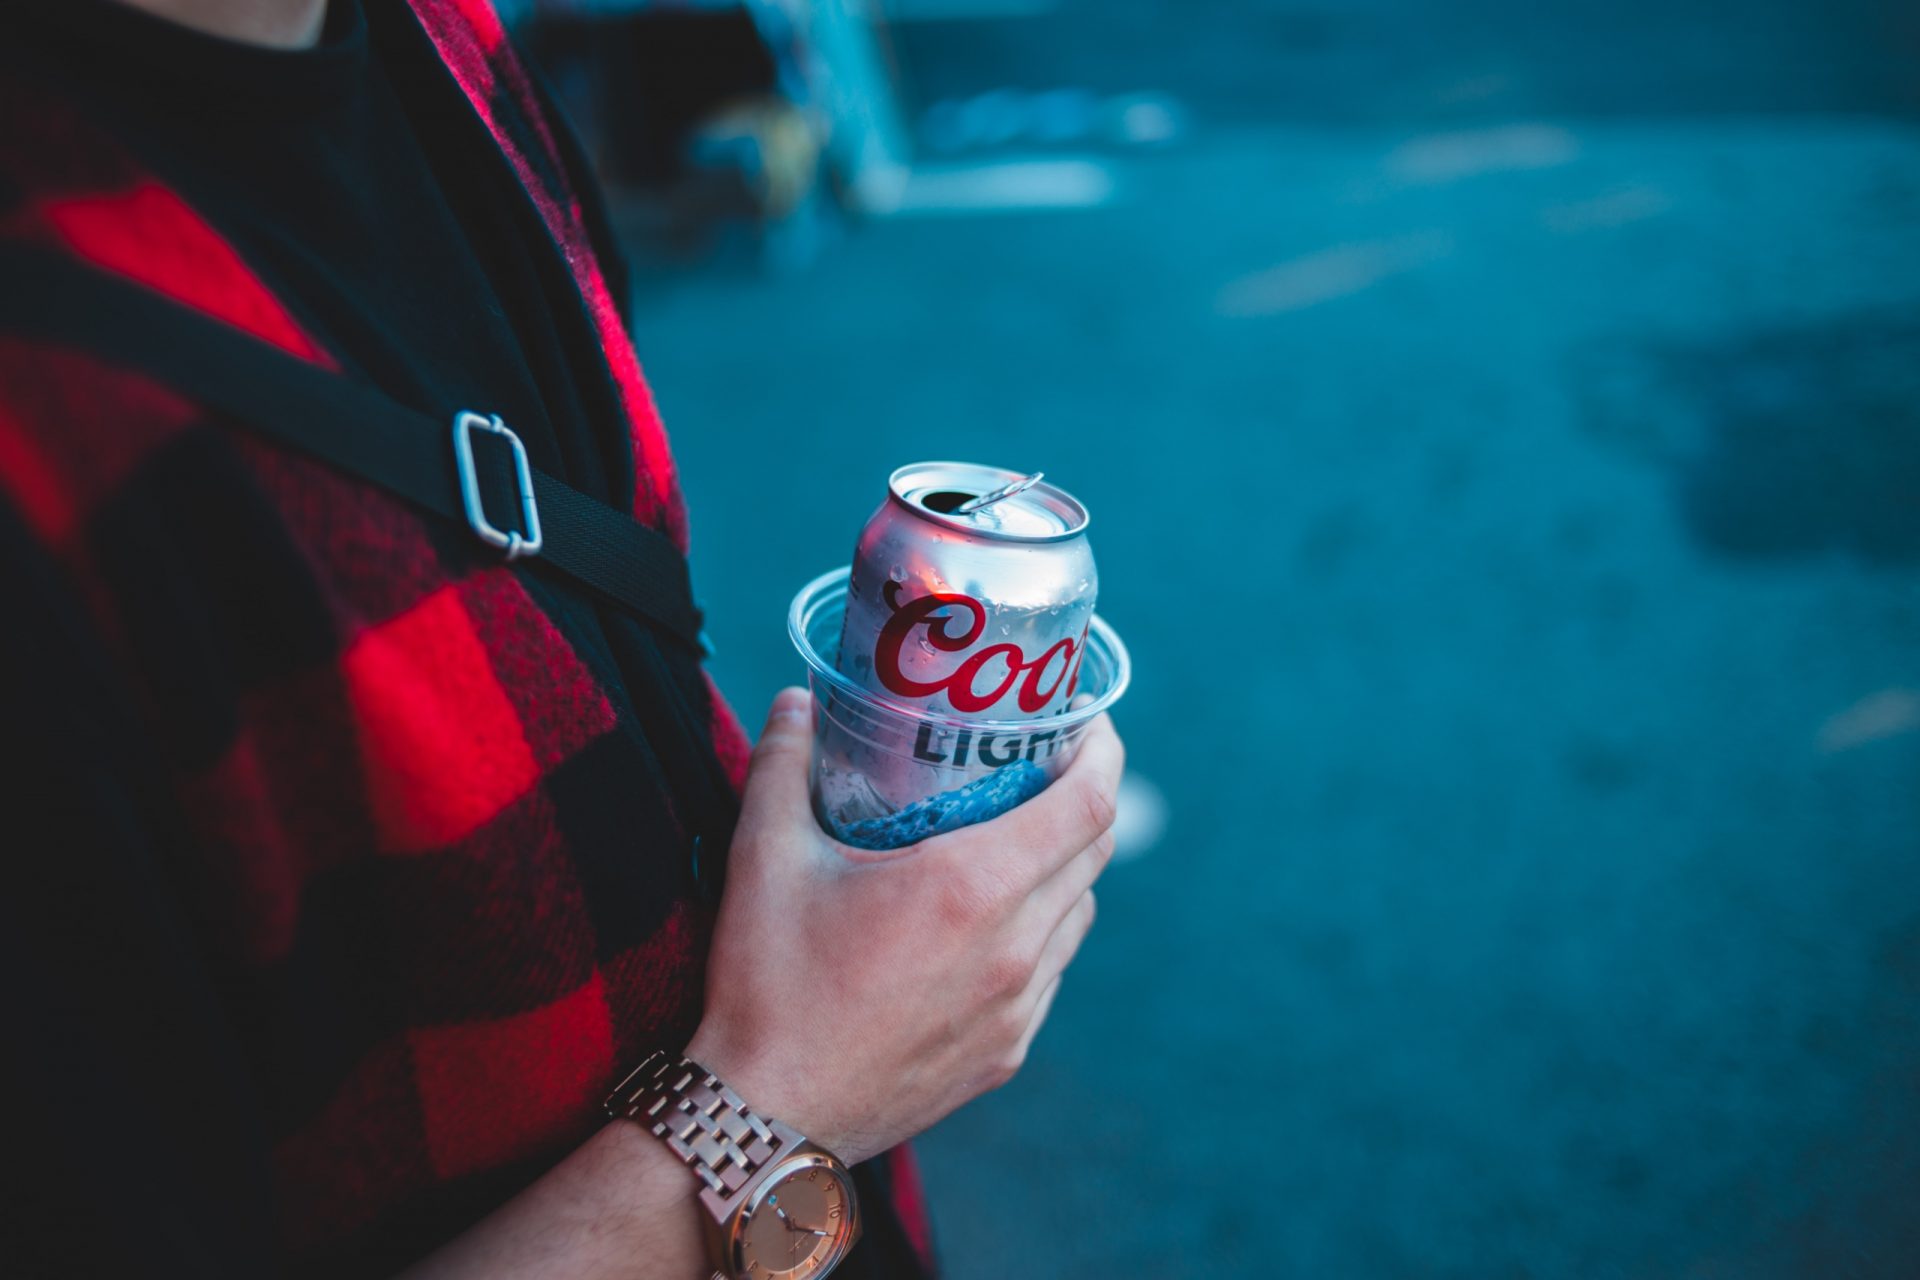 Man holding an aluminum can of beer in a plastic cup.